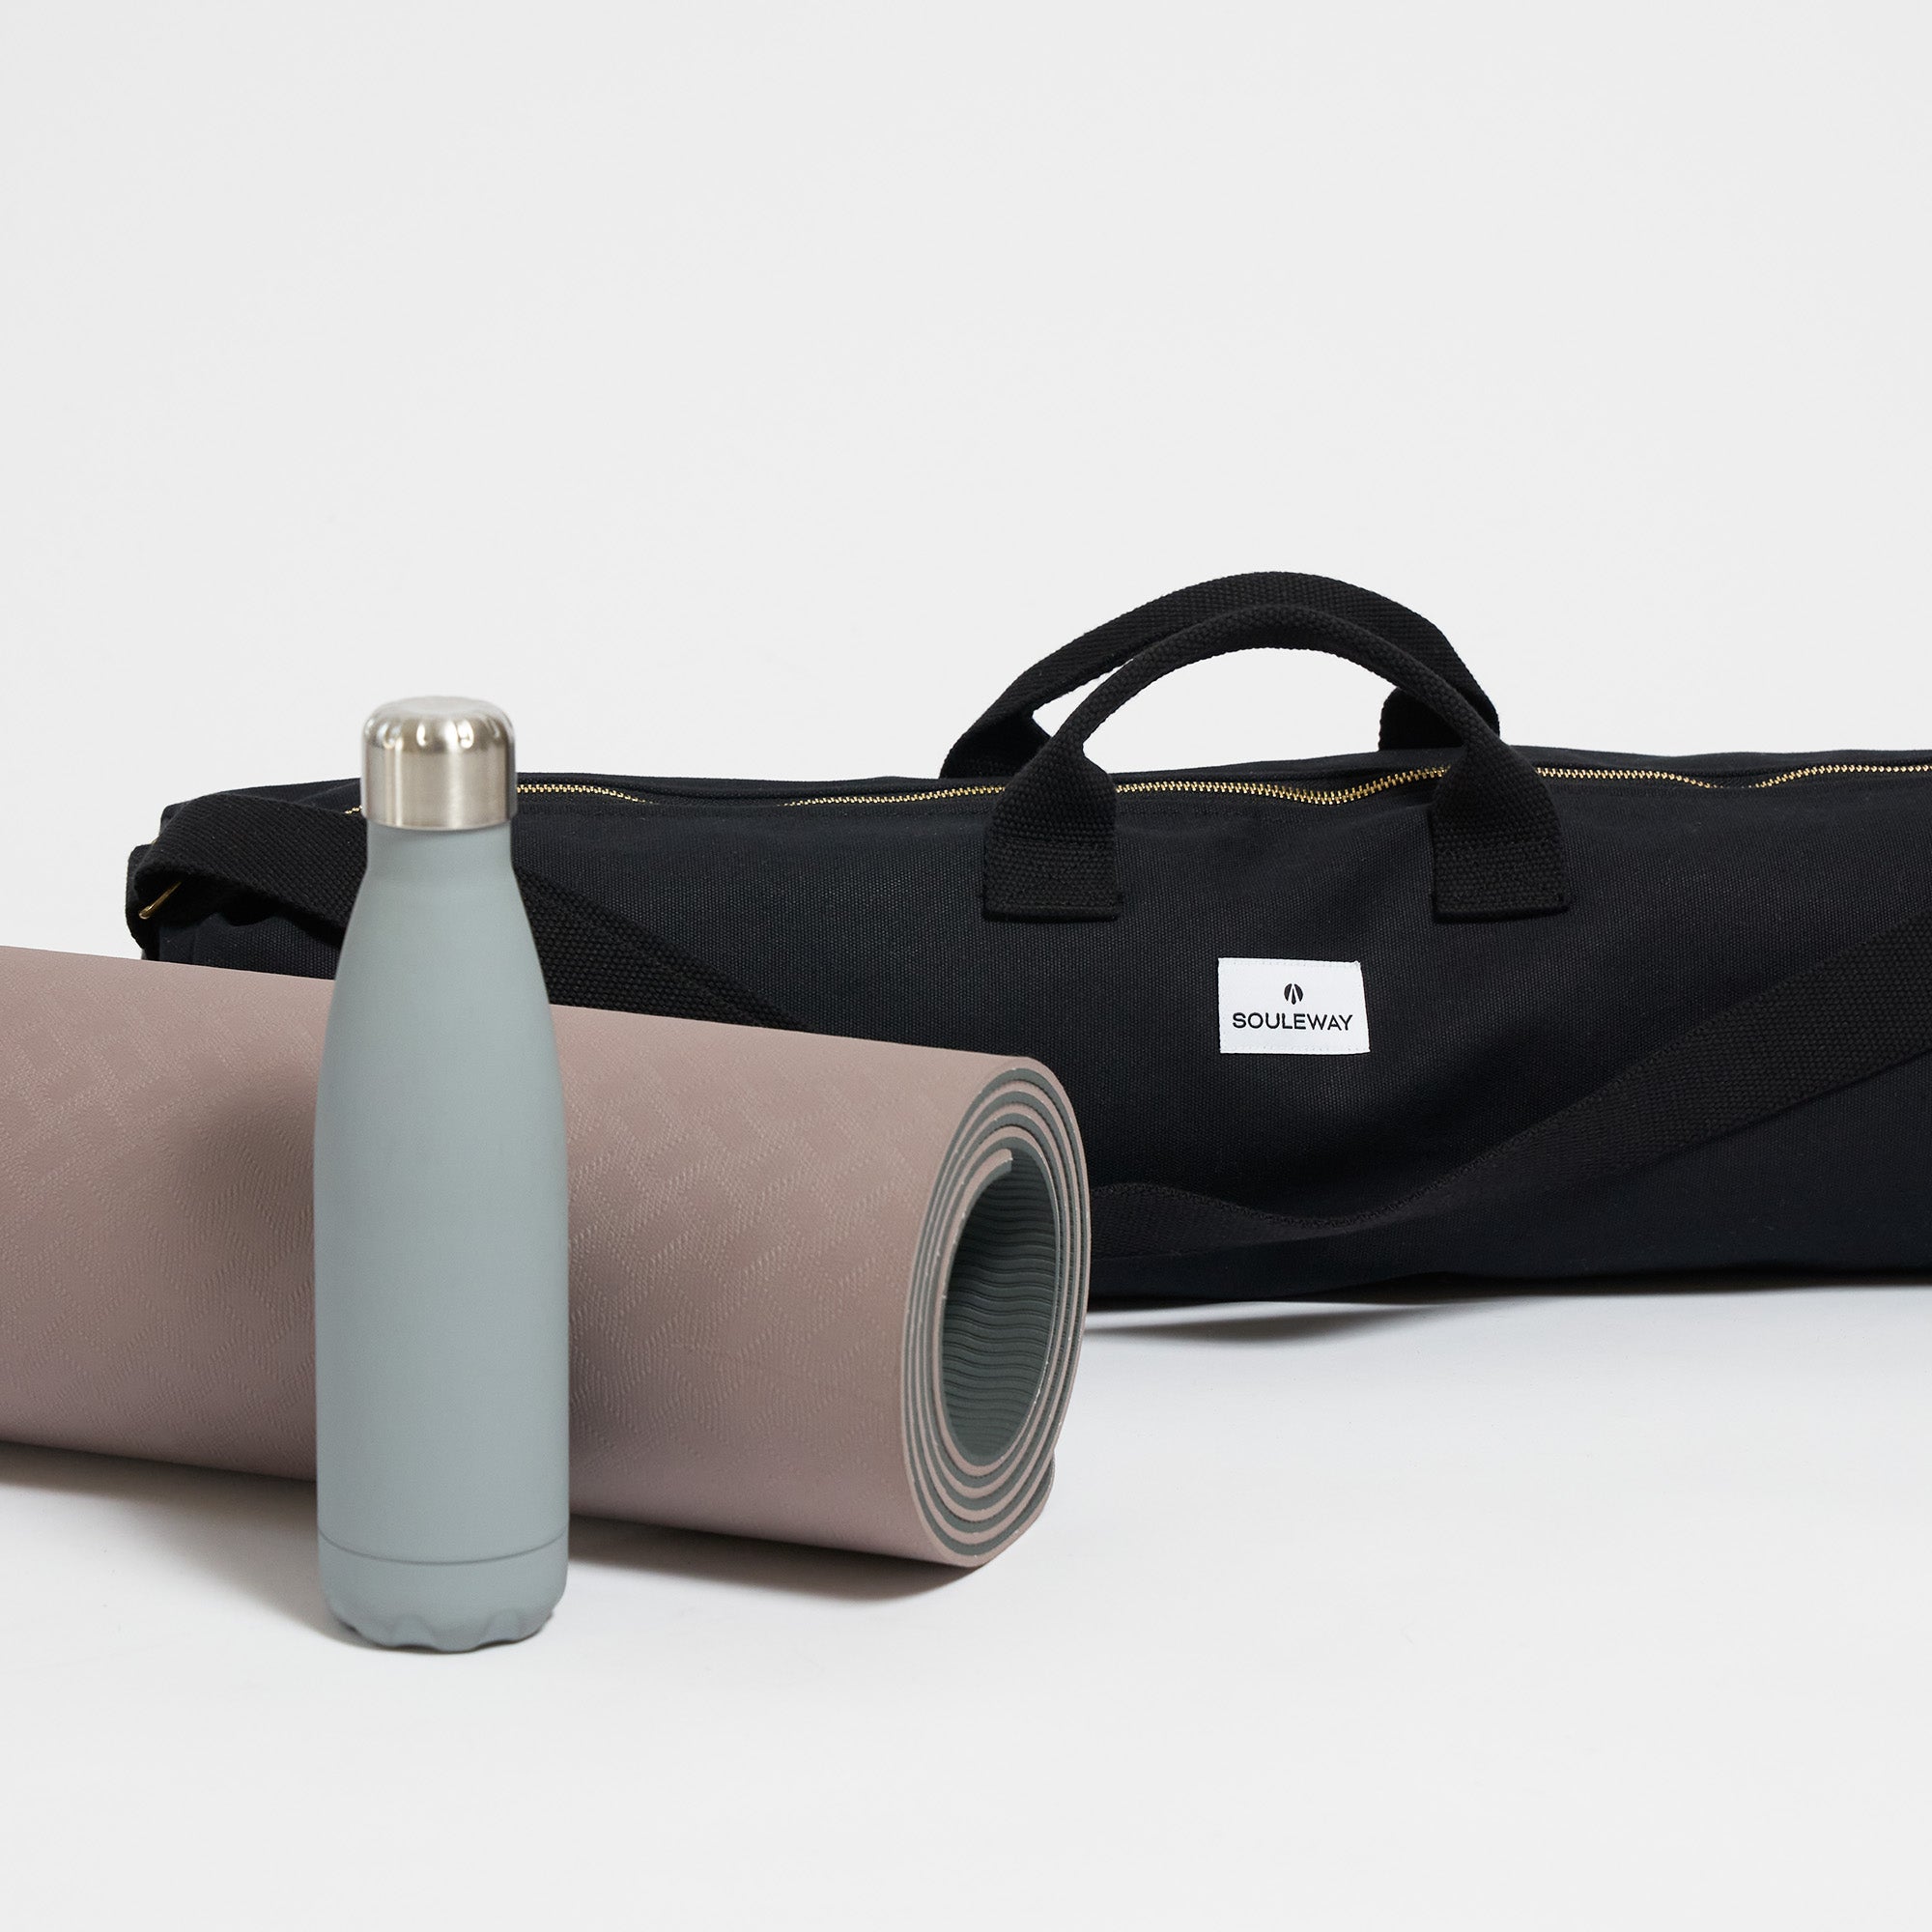 Waterproof Yoga Mat Gym Bag Women With Pocket Ideal For Pilates And Travel  From Yujiliu, $26.89